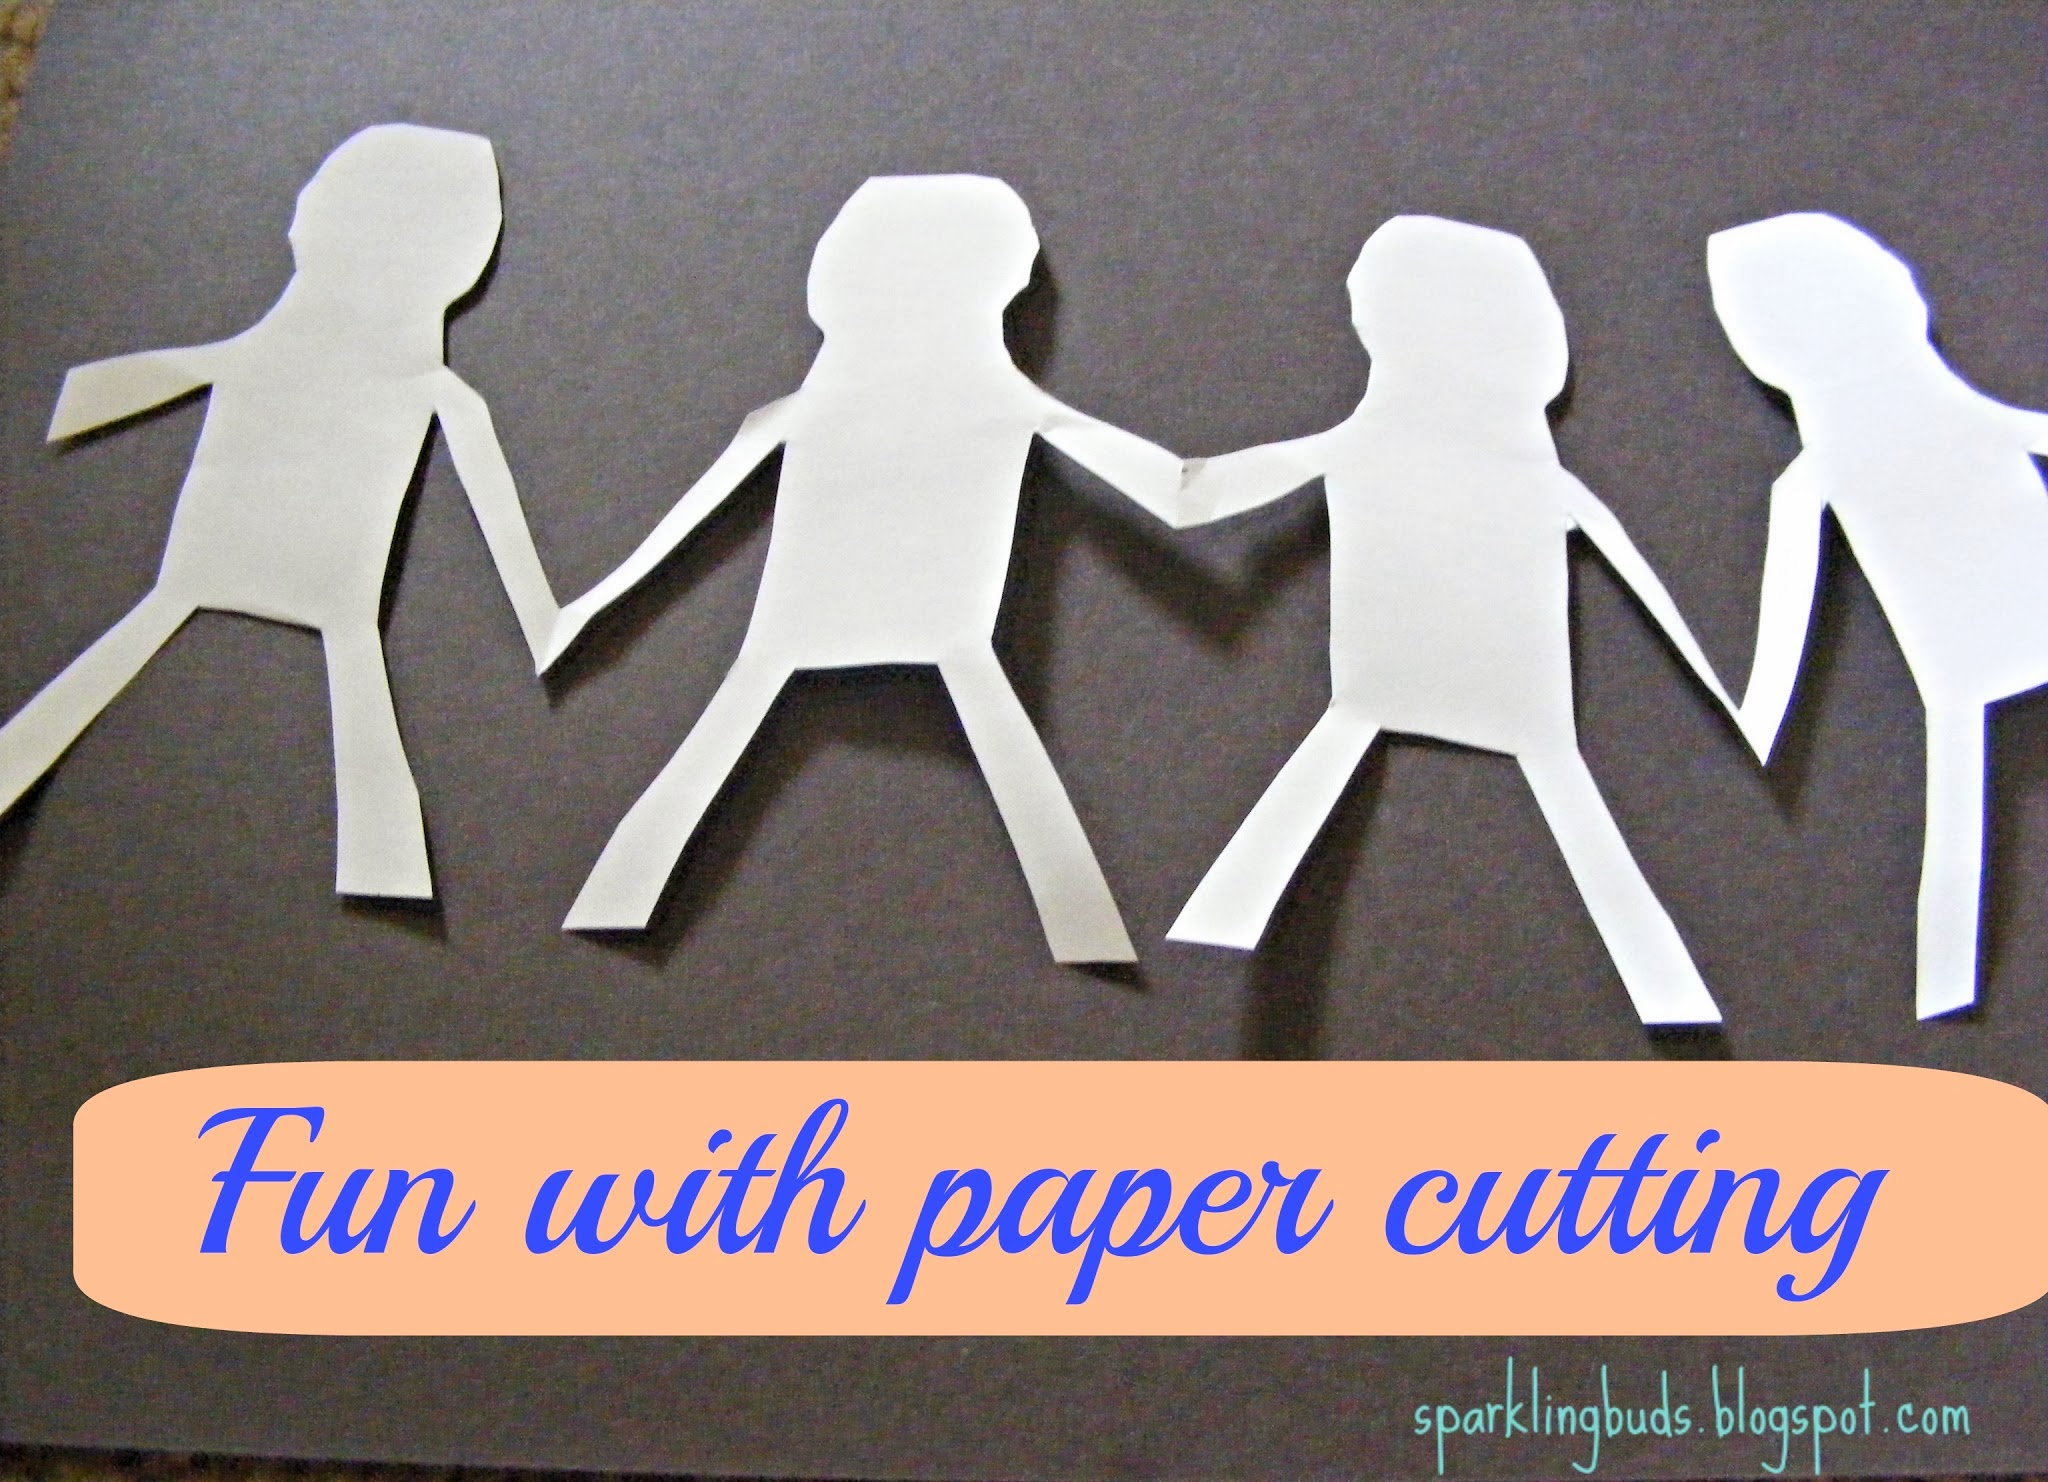 papercutting-fun-and-easy-for-kids-sparklingbuds